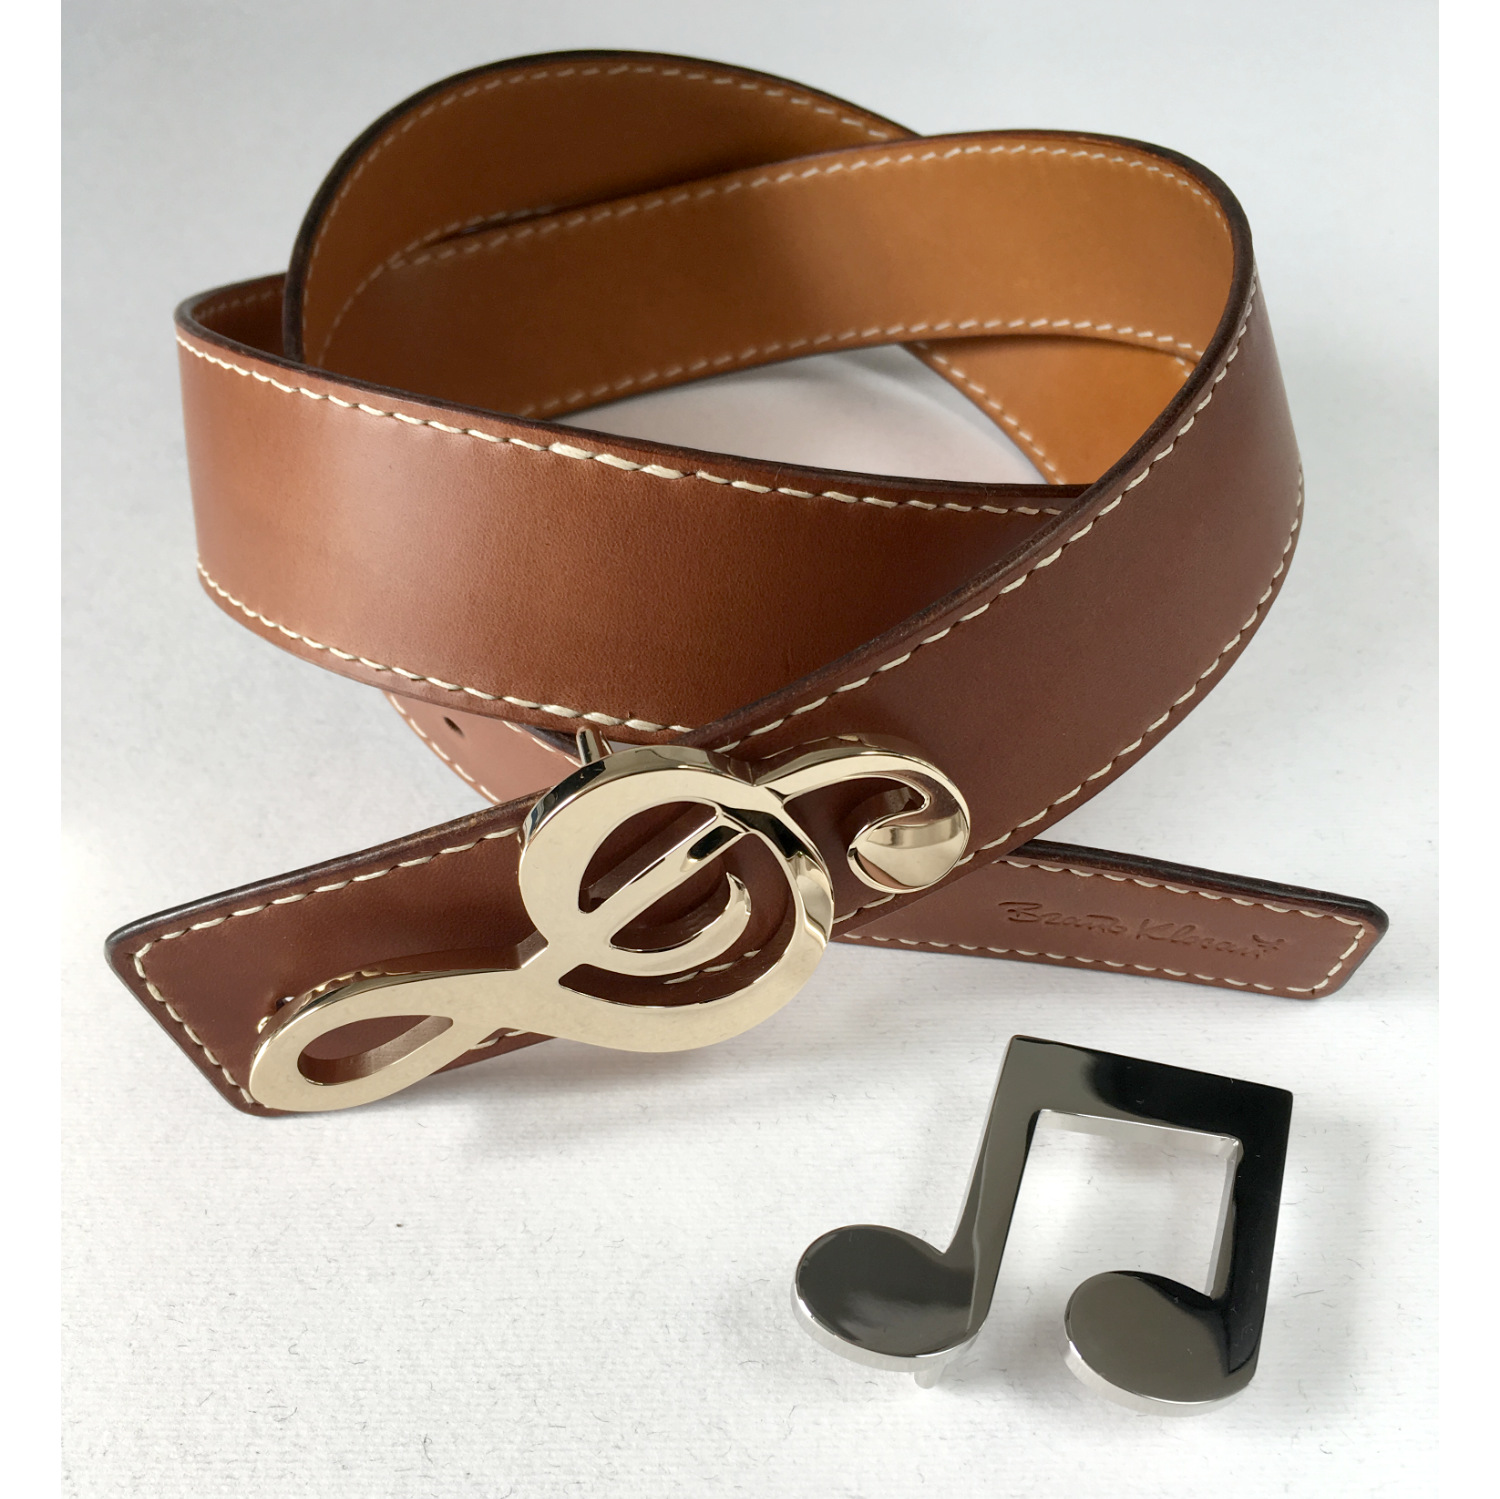 leather belt with two brass musical buckles